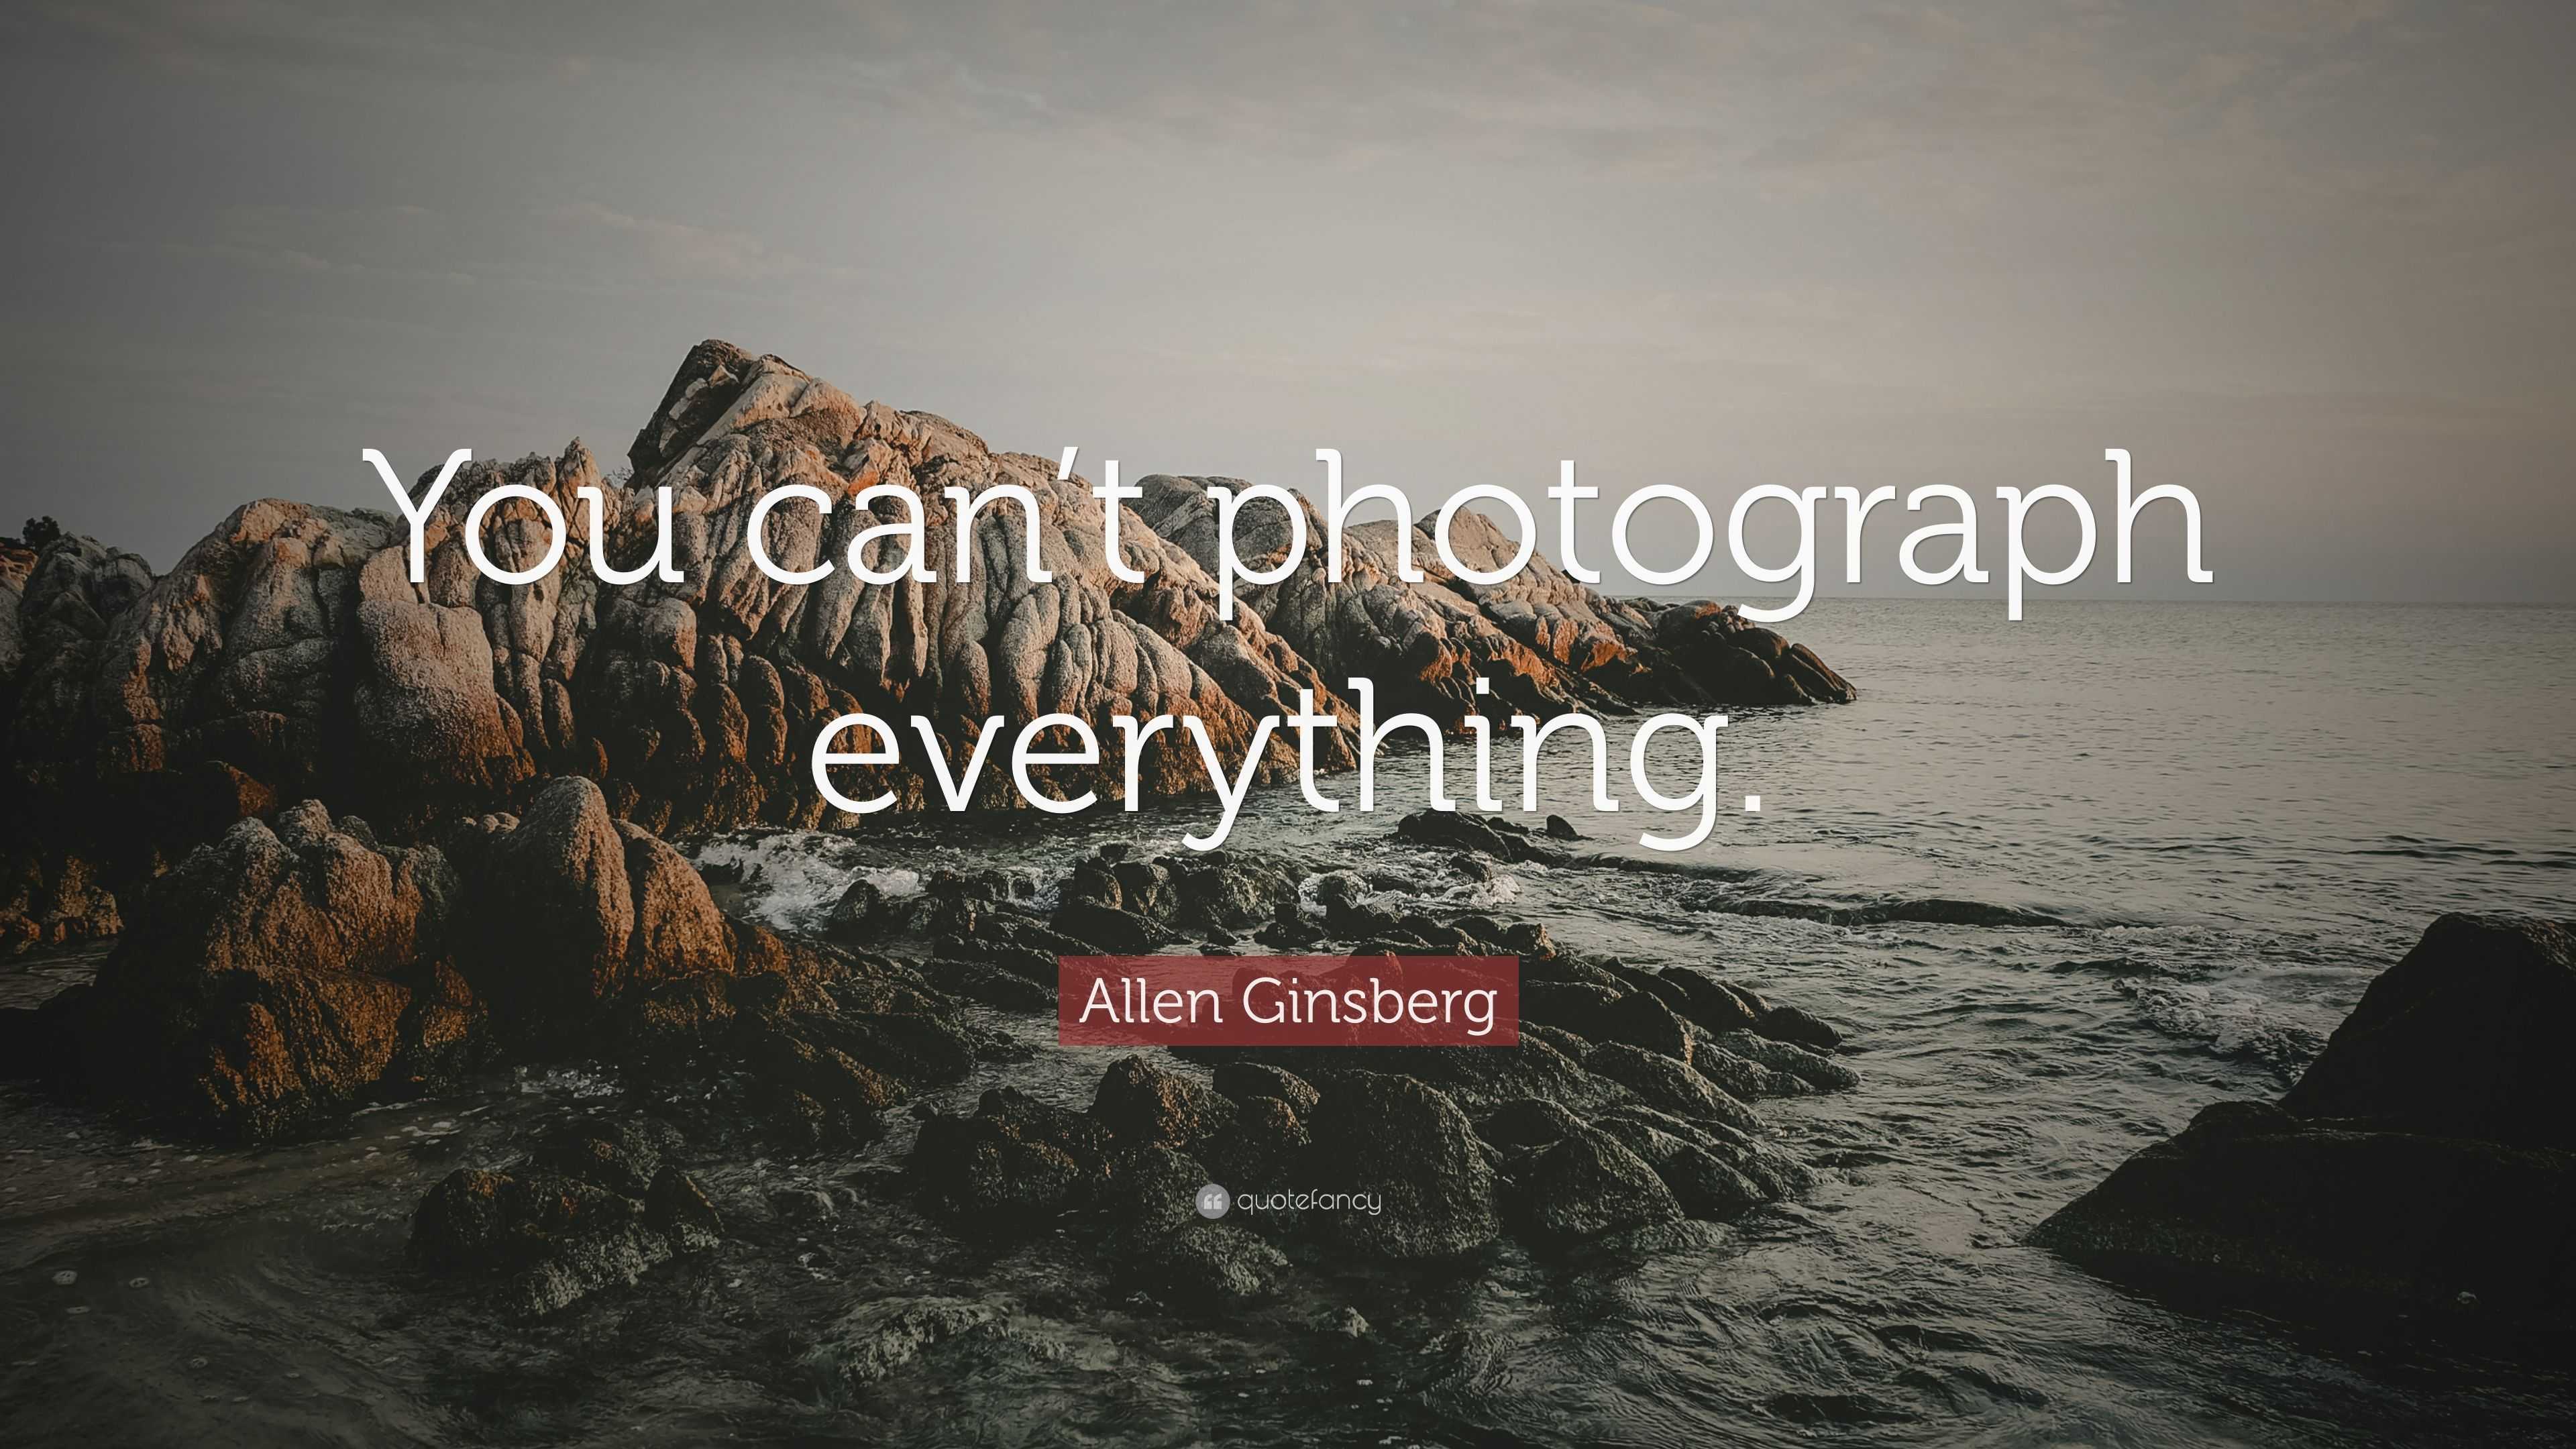 Allen Ginsberg Quote: “You can’t photograph everything.”